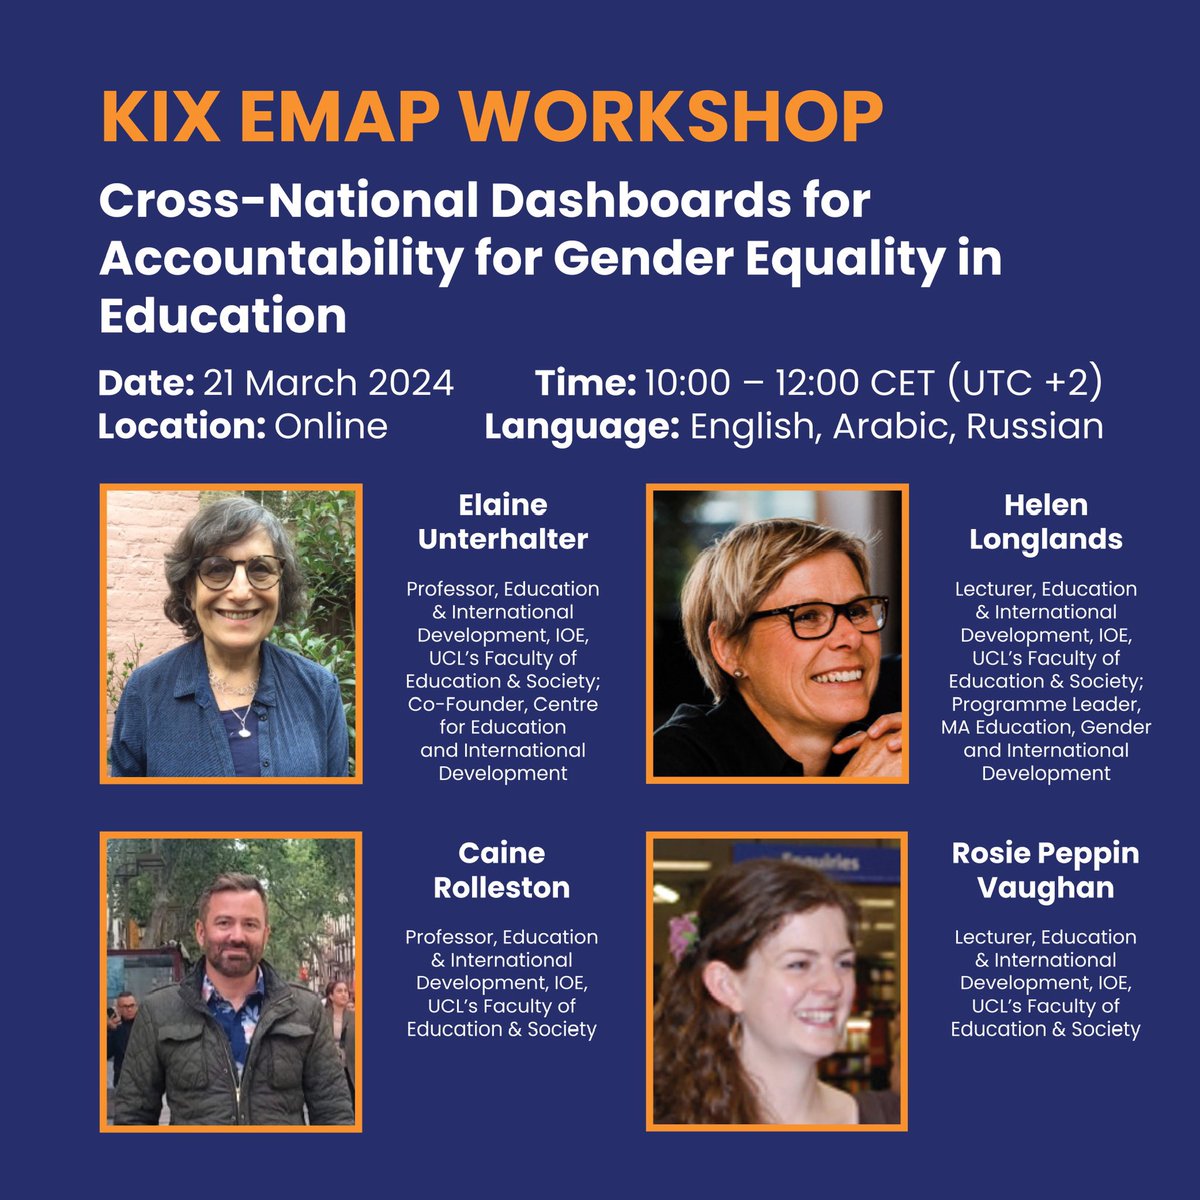 The upcoming KIX EMAP workshop will explore the role of data in accountability for gender equality in education, through the work of @gendereddata, with a spotlight on Bangladesh 🇧🇩 & Indonesia 🇮🇩

Learn more: tinyurl.com/5enjc9zf
Register now: tinyurl.com/48eps55j